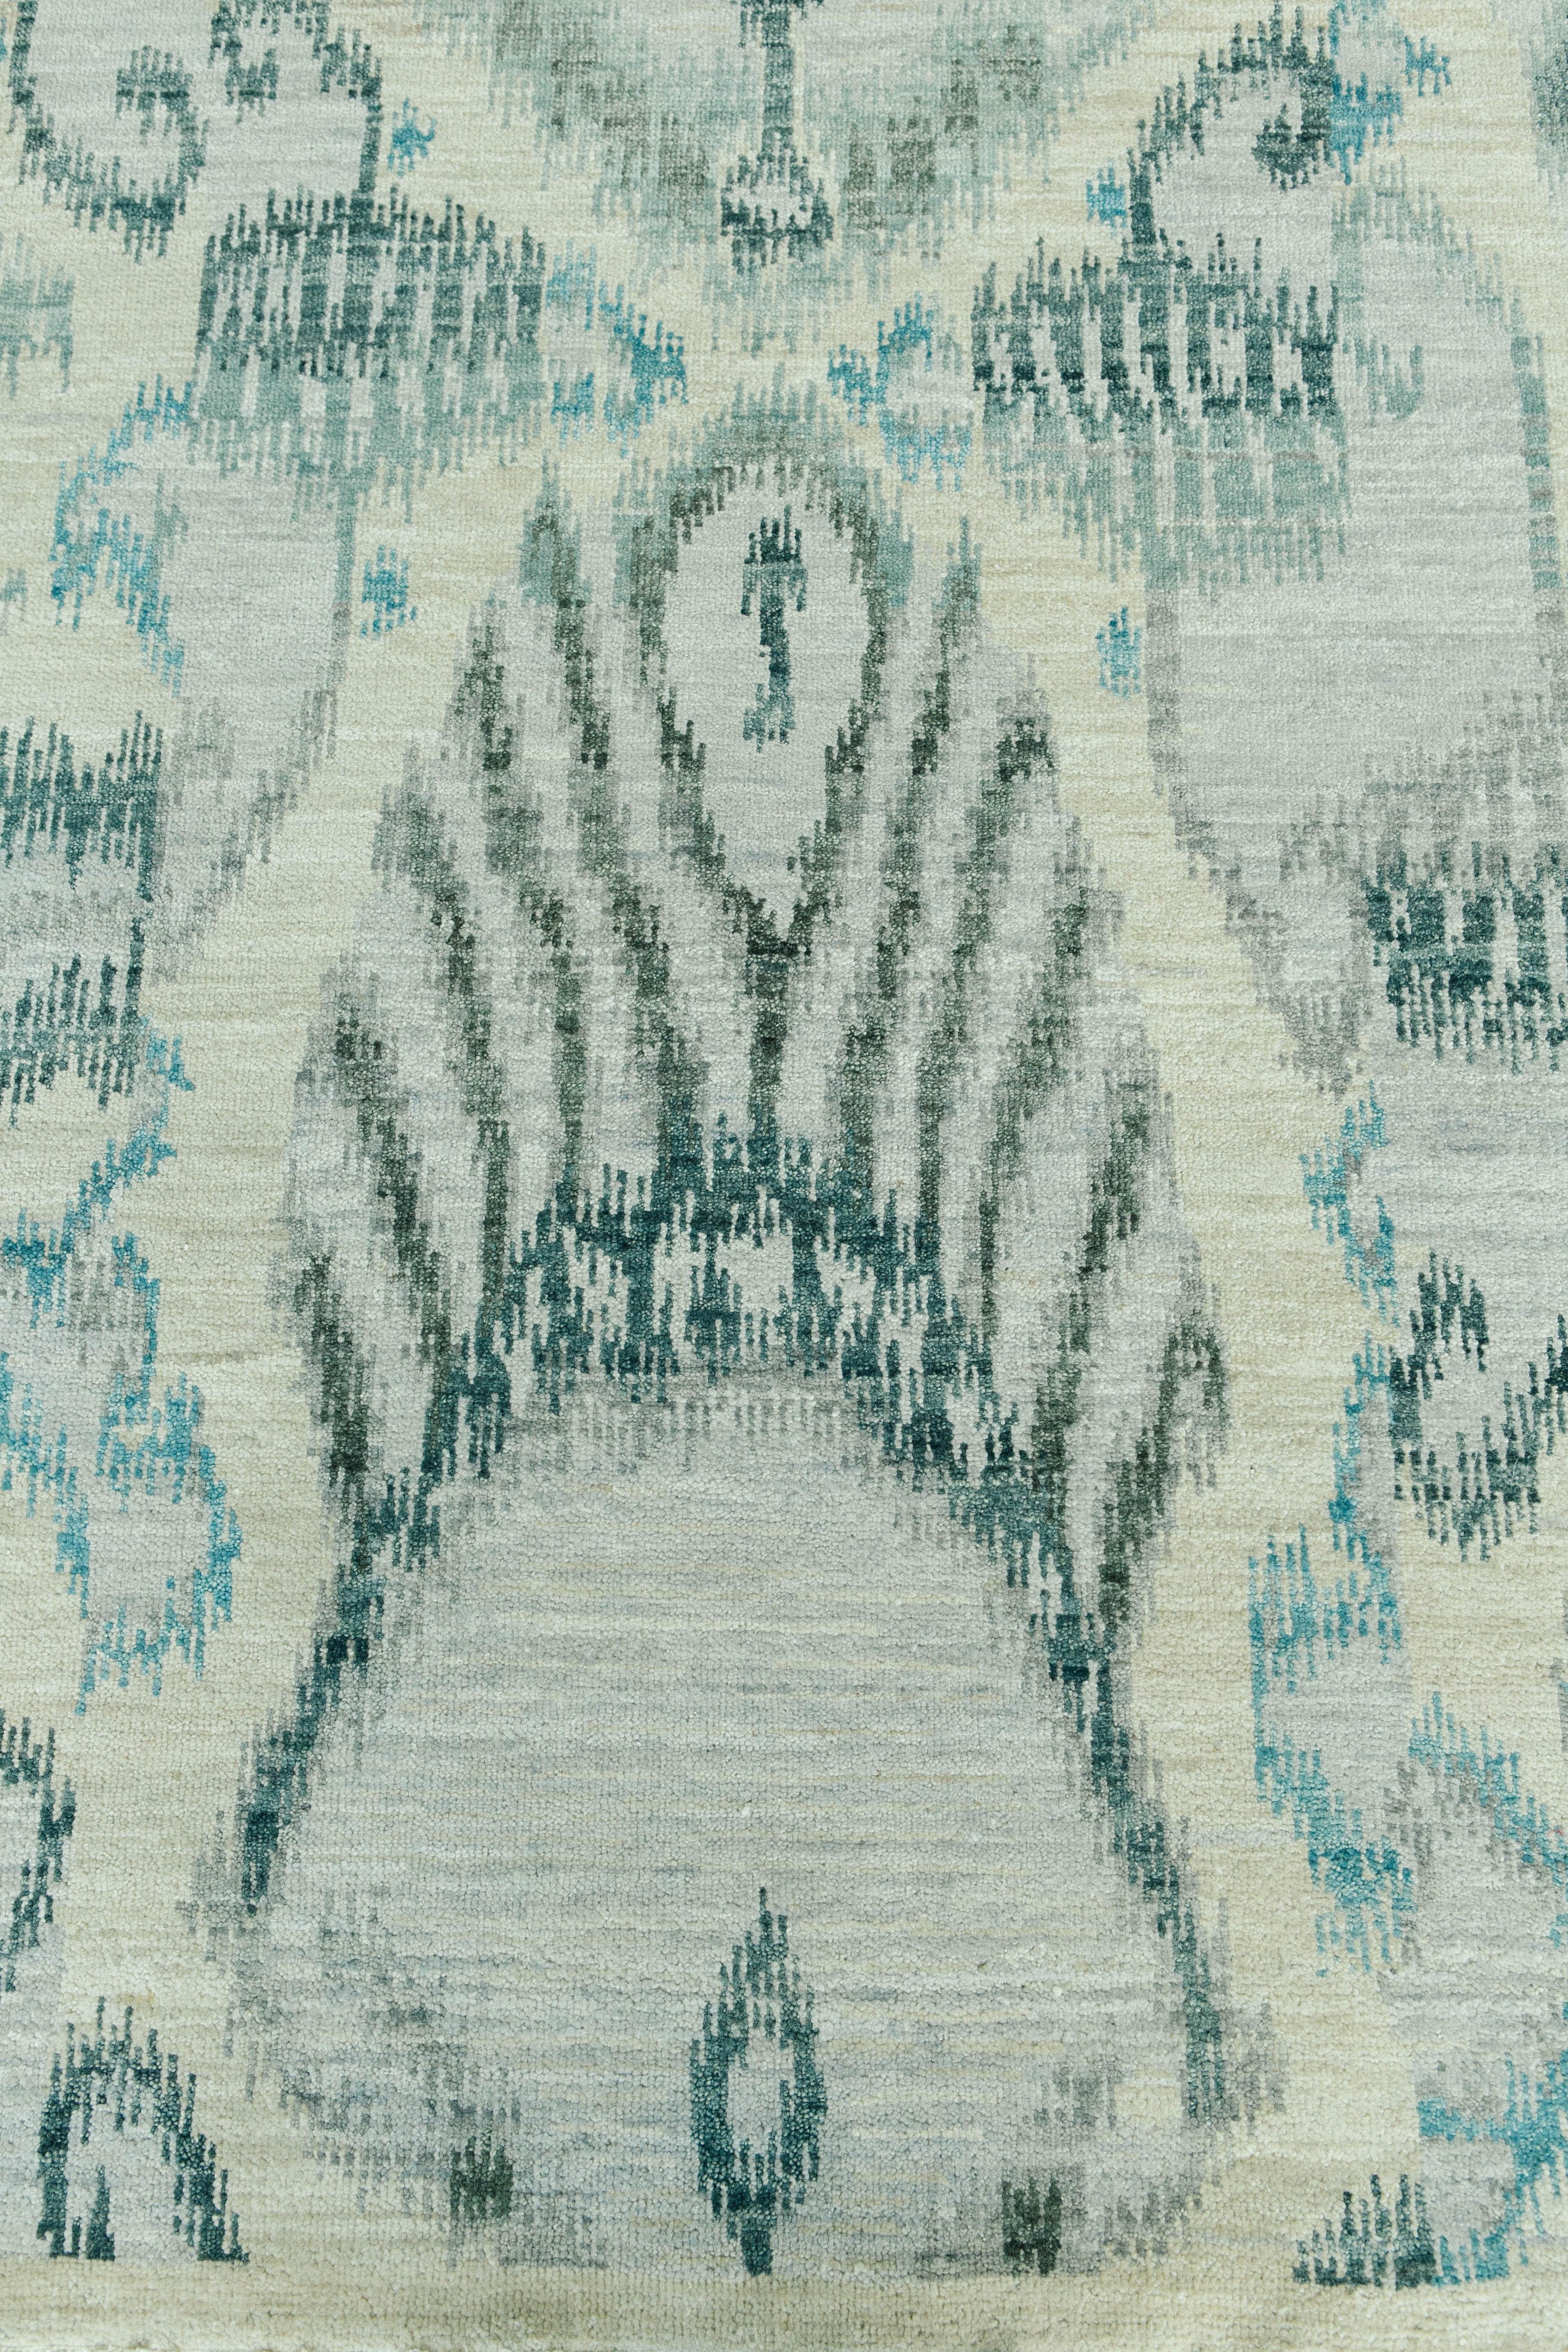 'Camzol' is beautiful blue and ivory Ikat design. Its playful design will bring excitement to any space while its calming hues of blue create an uplifting essence. Ikat designs have been globally inspired for today's modern design world.

Rug